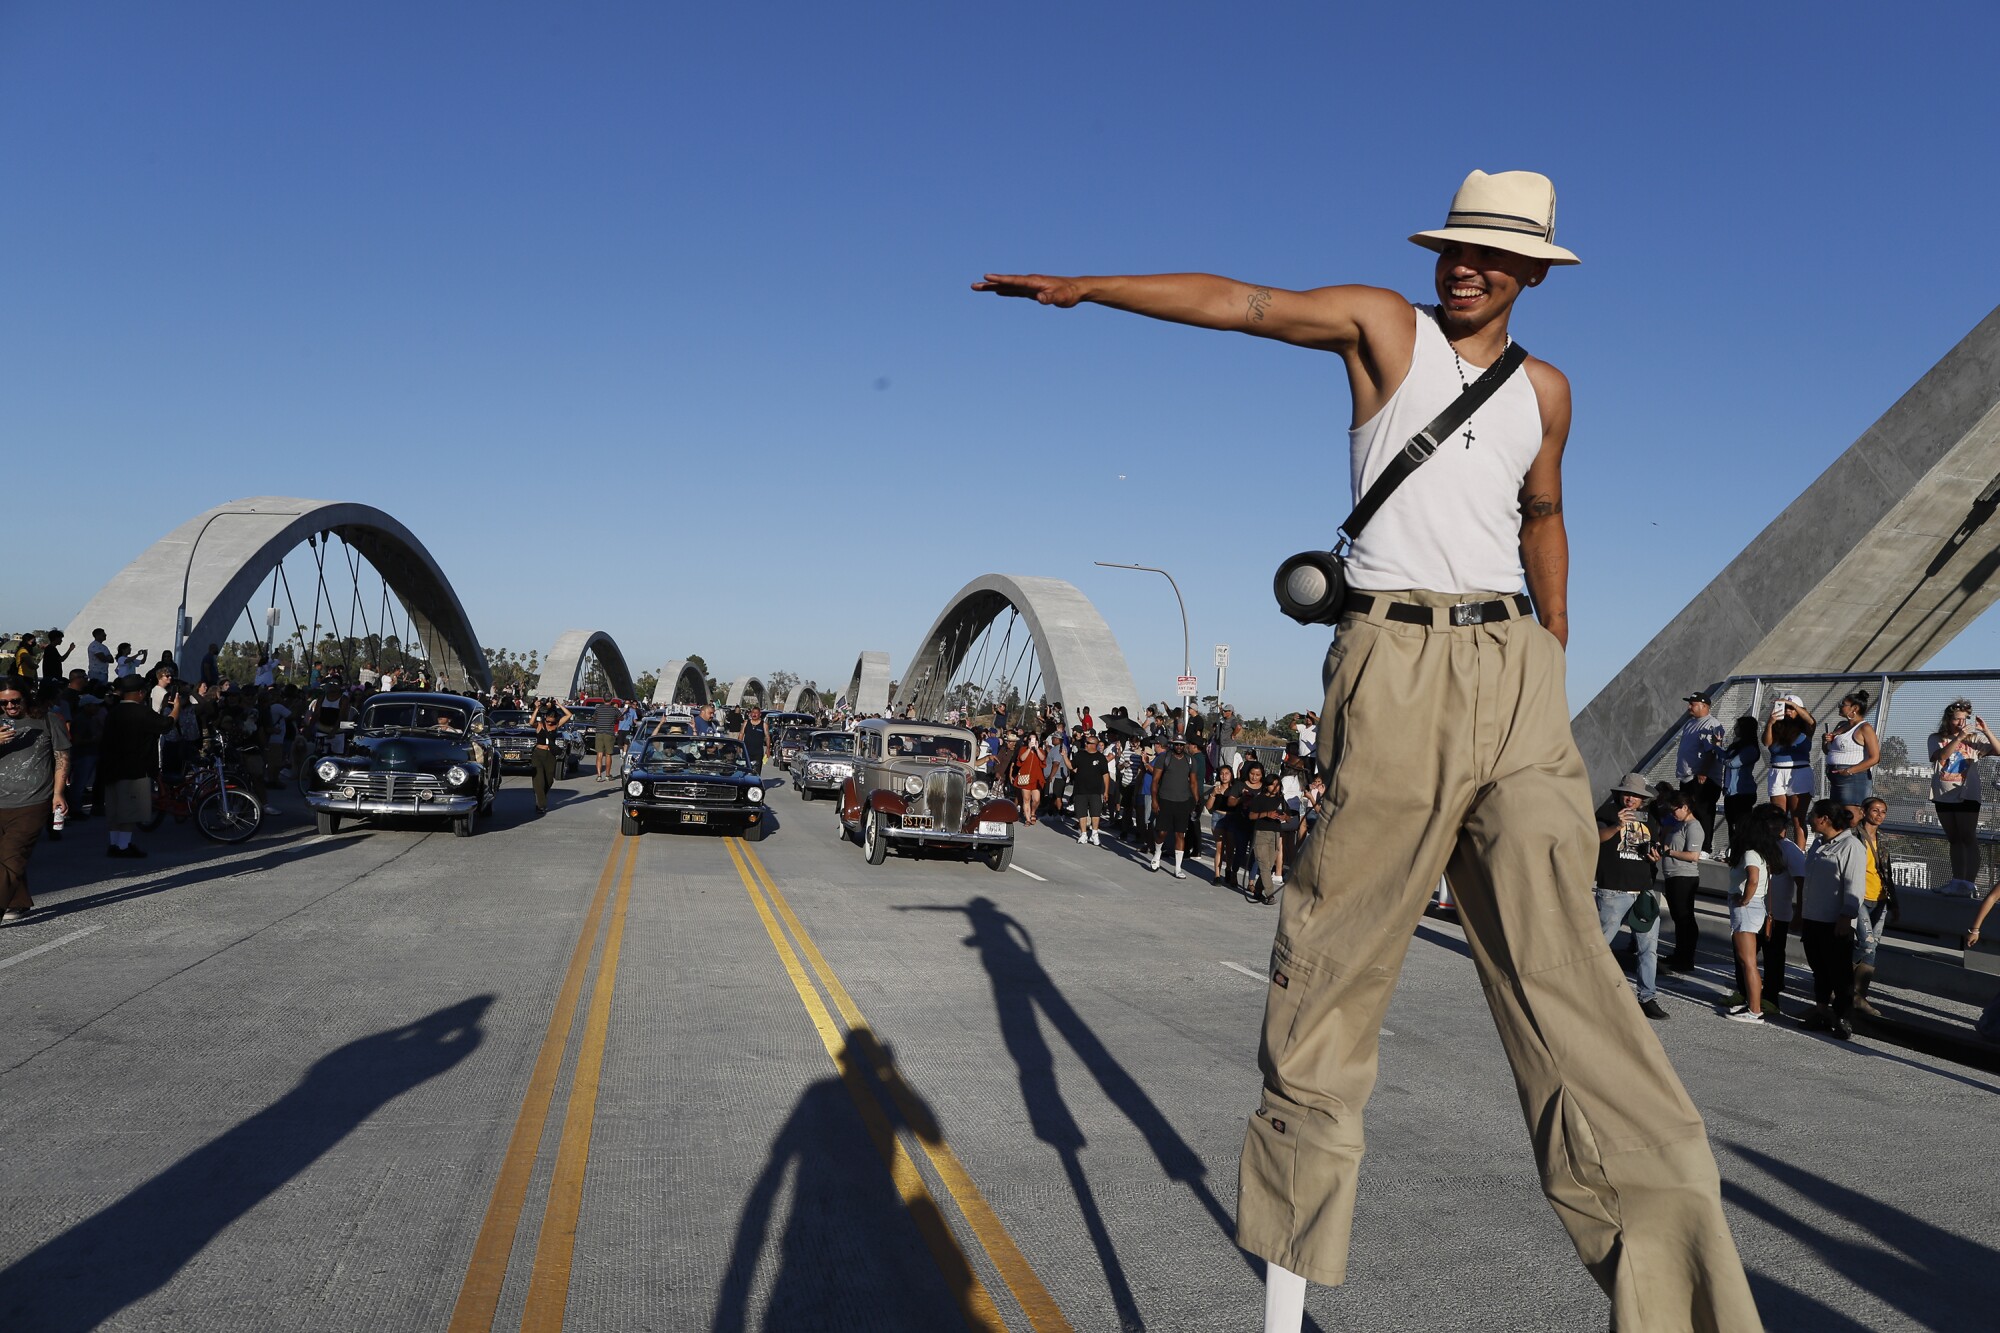 A man on stilts is shown with a group of low riders on the 6th Street Viaduct.